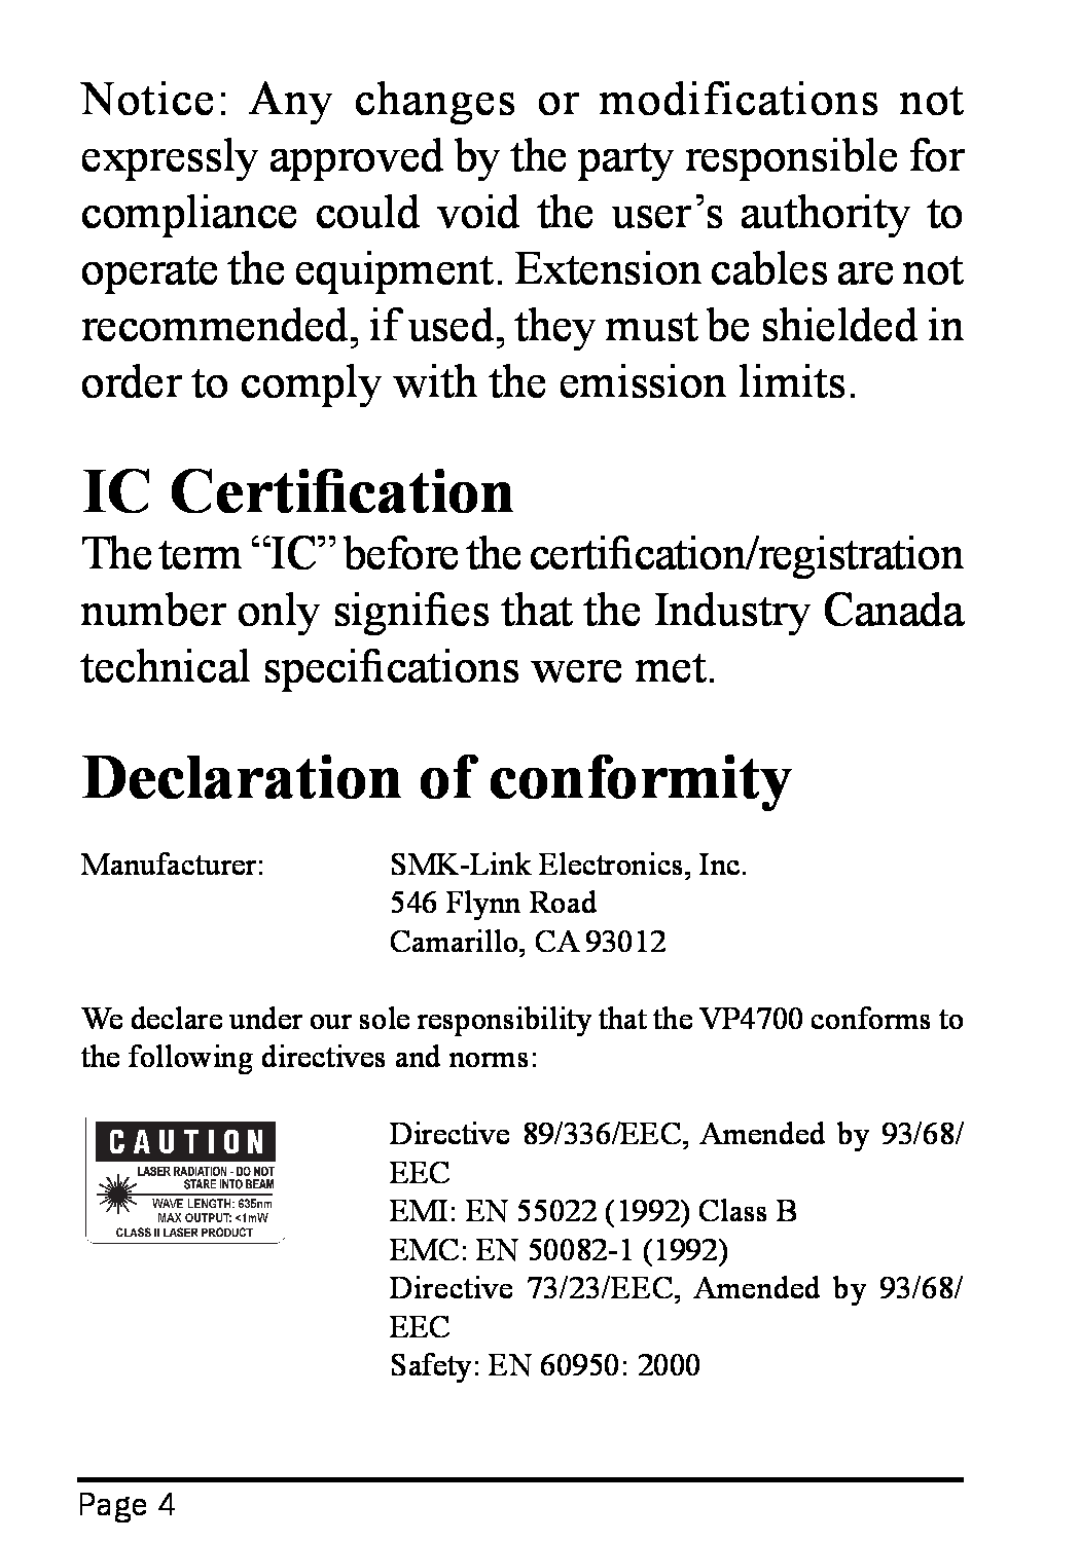 Interlink electronic 94-01441, RemotePoint Onyx user manual IC Certification, Declaration of conformity 